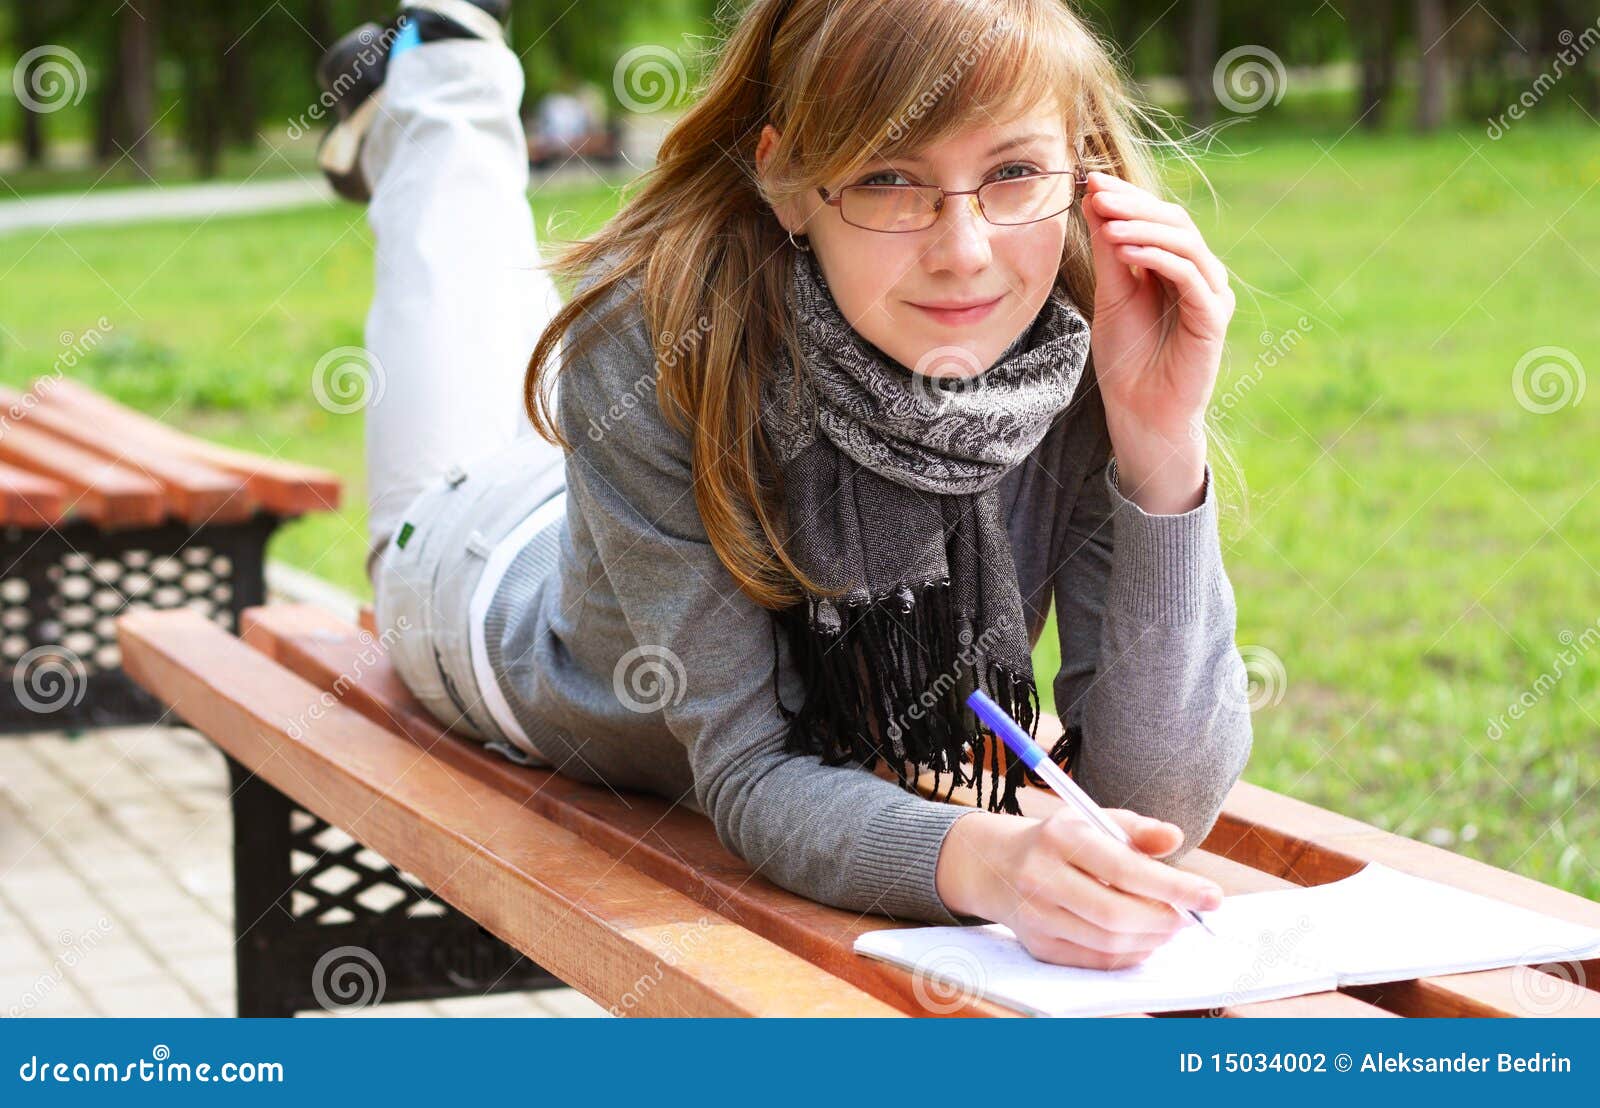 the girl lays on a bench, and writes